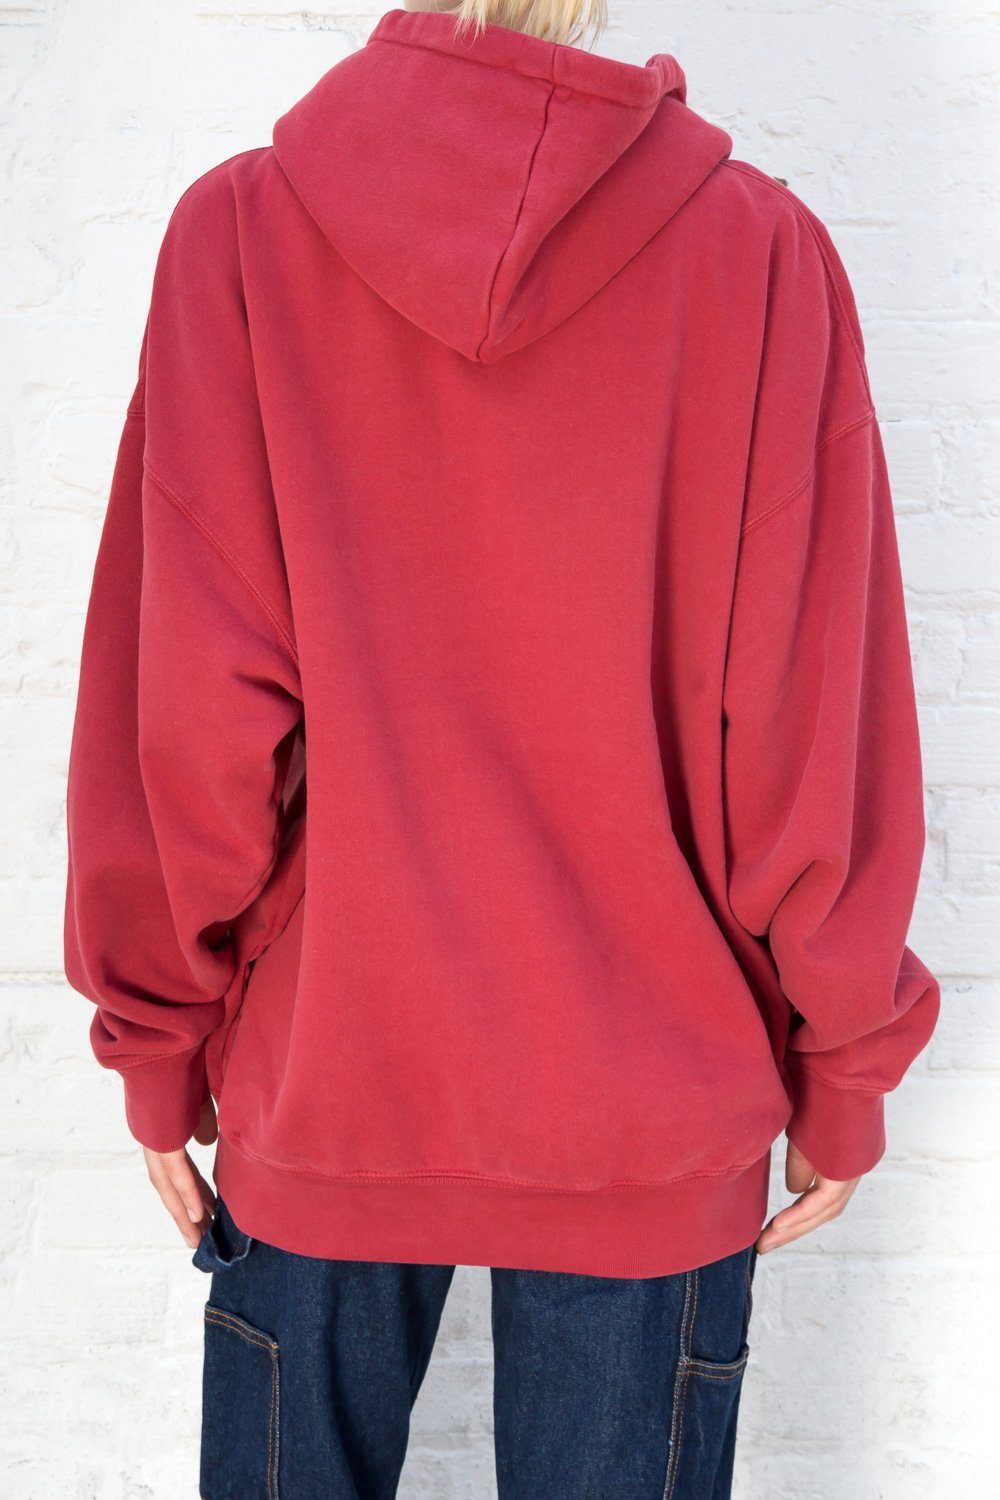 Brandy Melville red brandy top - $13 (45% Off Retail) - From casey